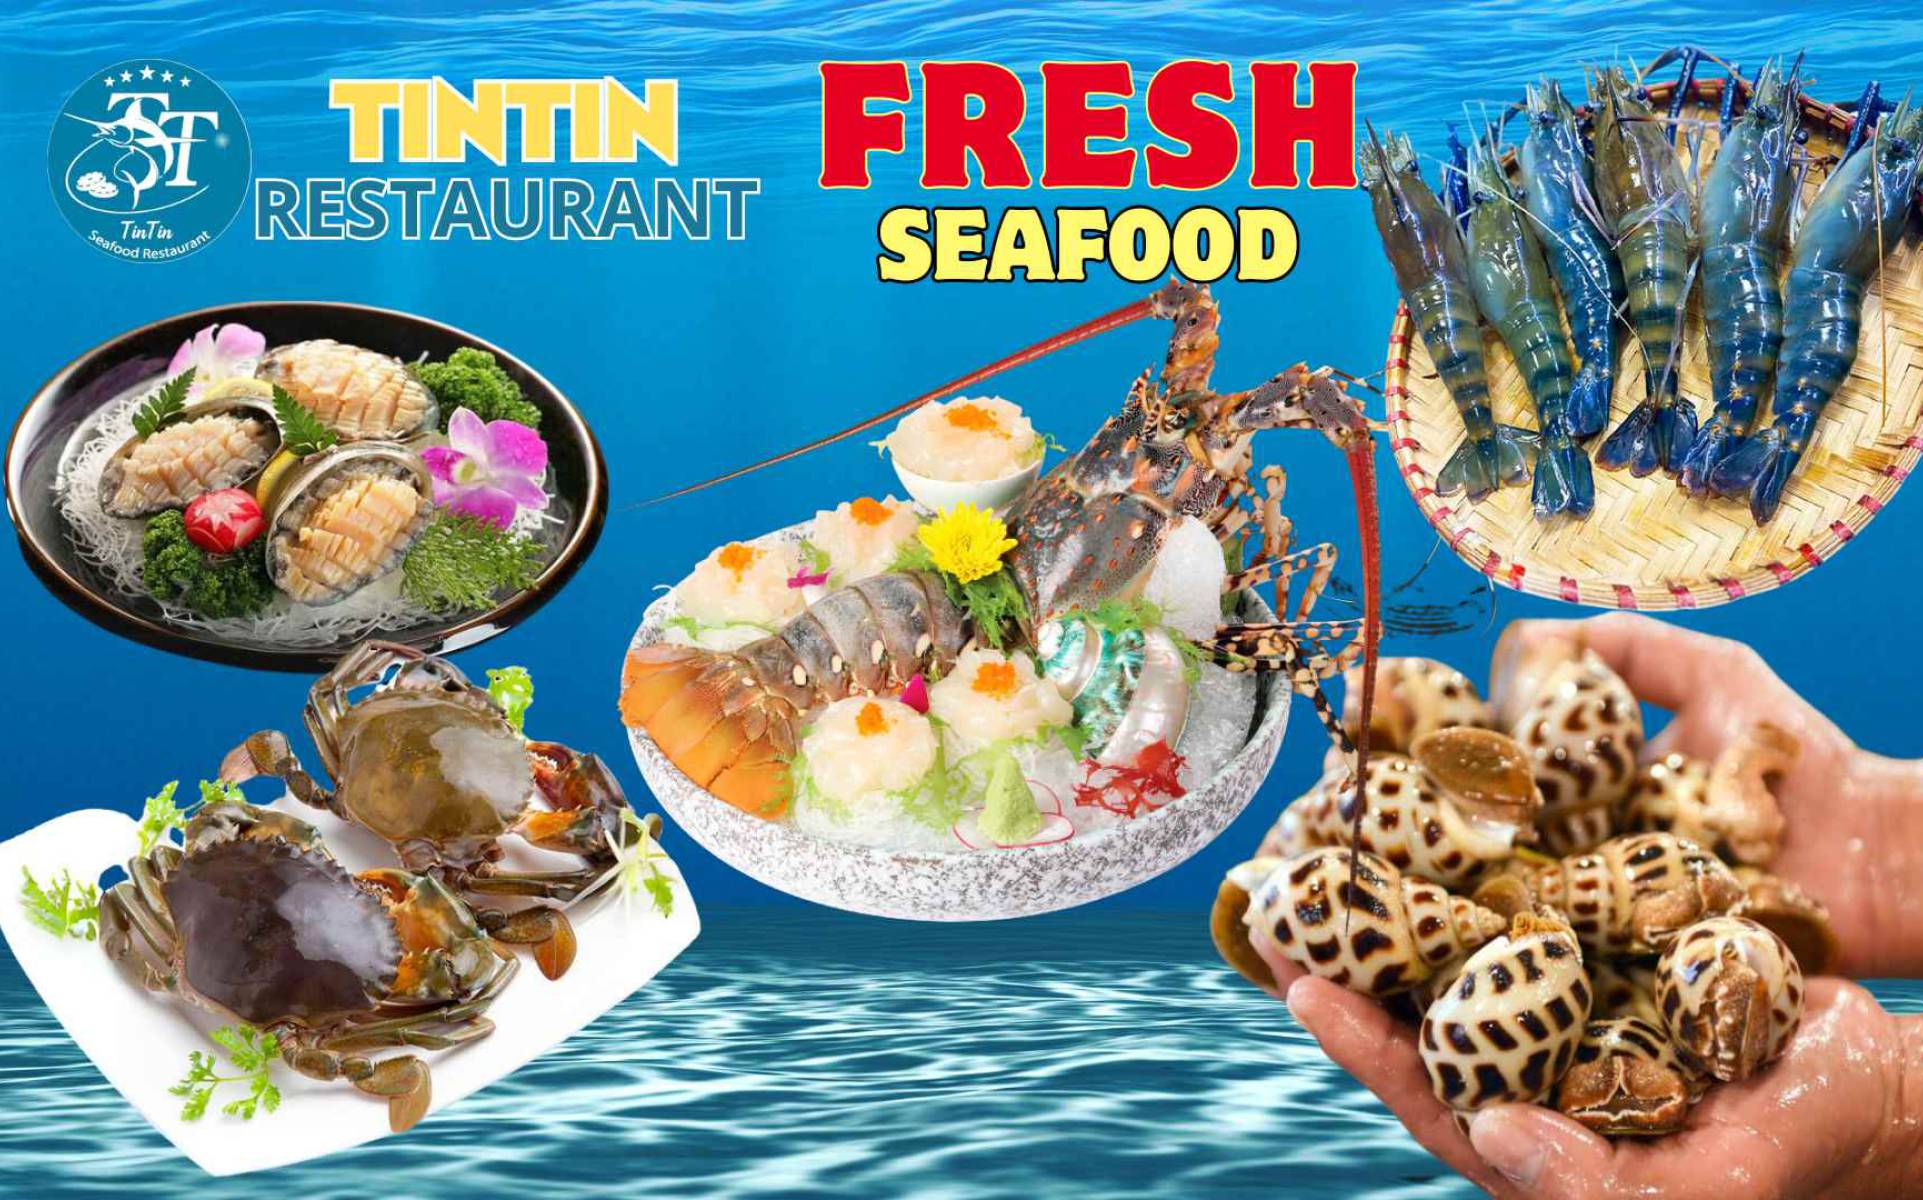 Fresh seafood, diversely prepared!